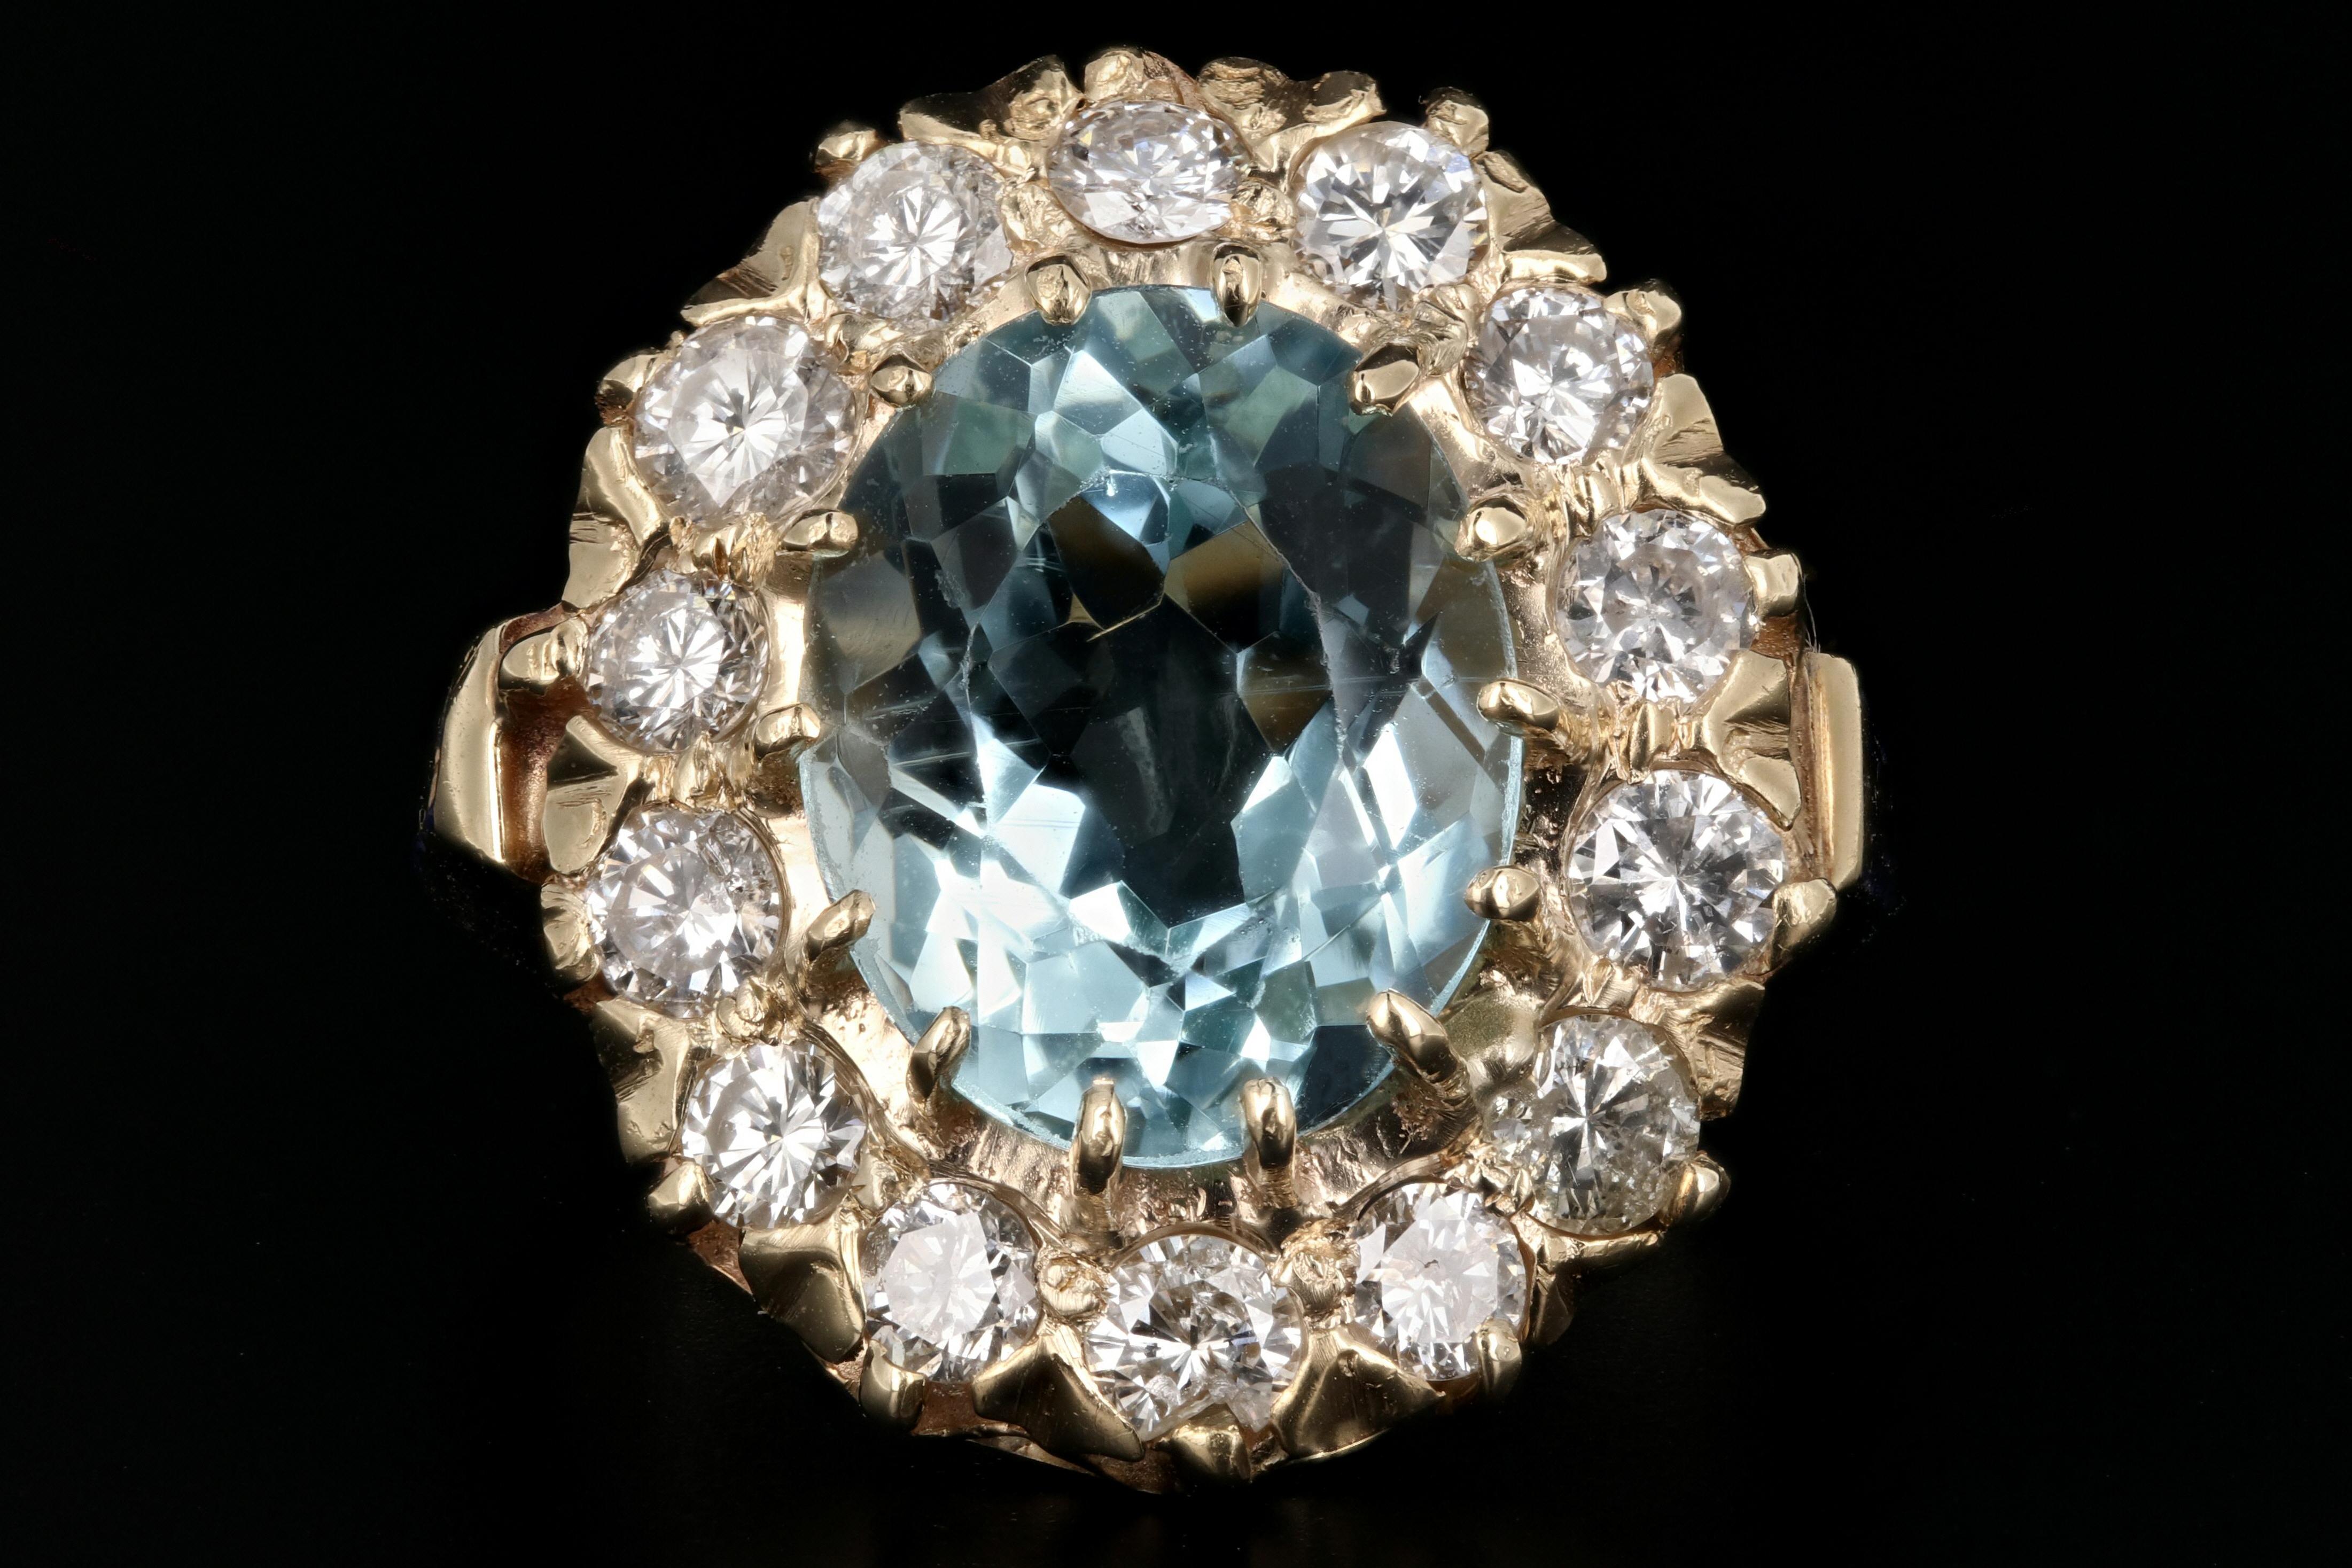 Era: Retro c.1950's

Hallmarks: 14K A

Composition: 14K Yellow Gold

Primary Stone: Oval Cut Aquamarine

Stone Carat: Approximately 4 carats

Accent Stone: Diamonds

Color/Clarity: G/H - I1

Total Diamond Weight: About 1.3 CTW

Ring Length: